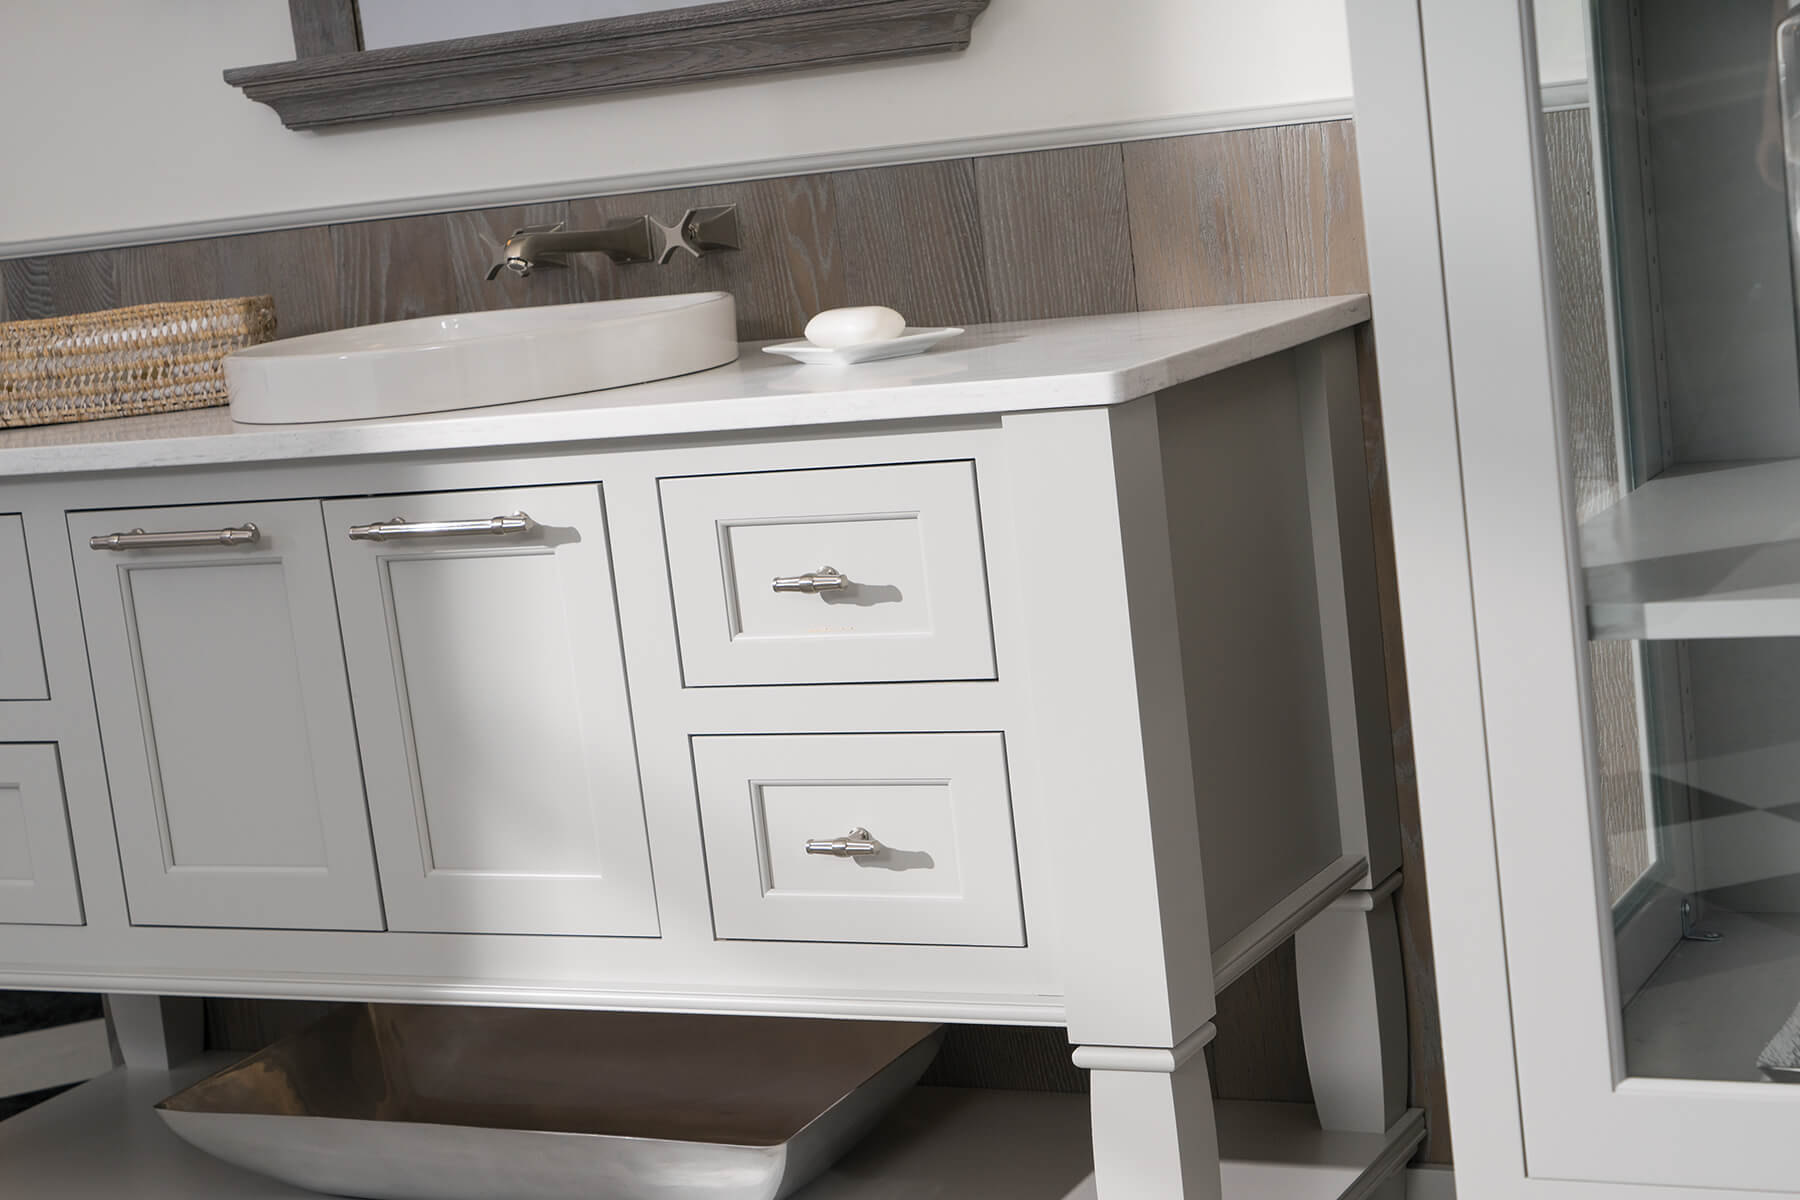 Light gray painted bathroom vanity cabinets from Dura Supreme Cabinetry.